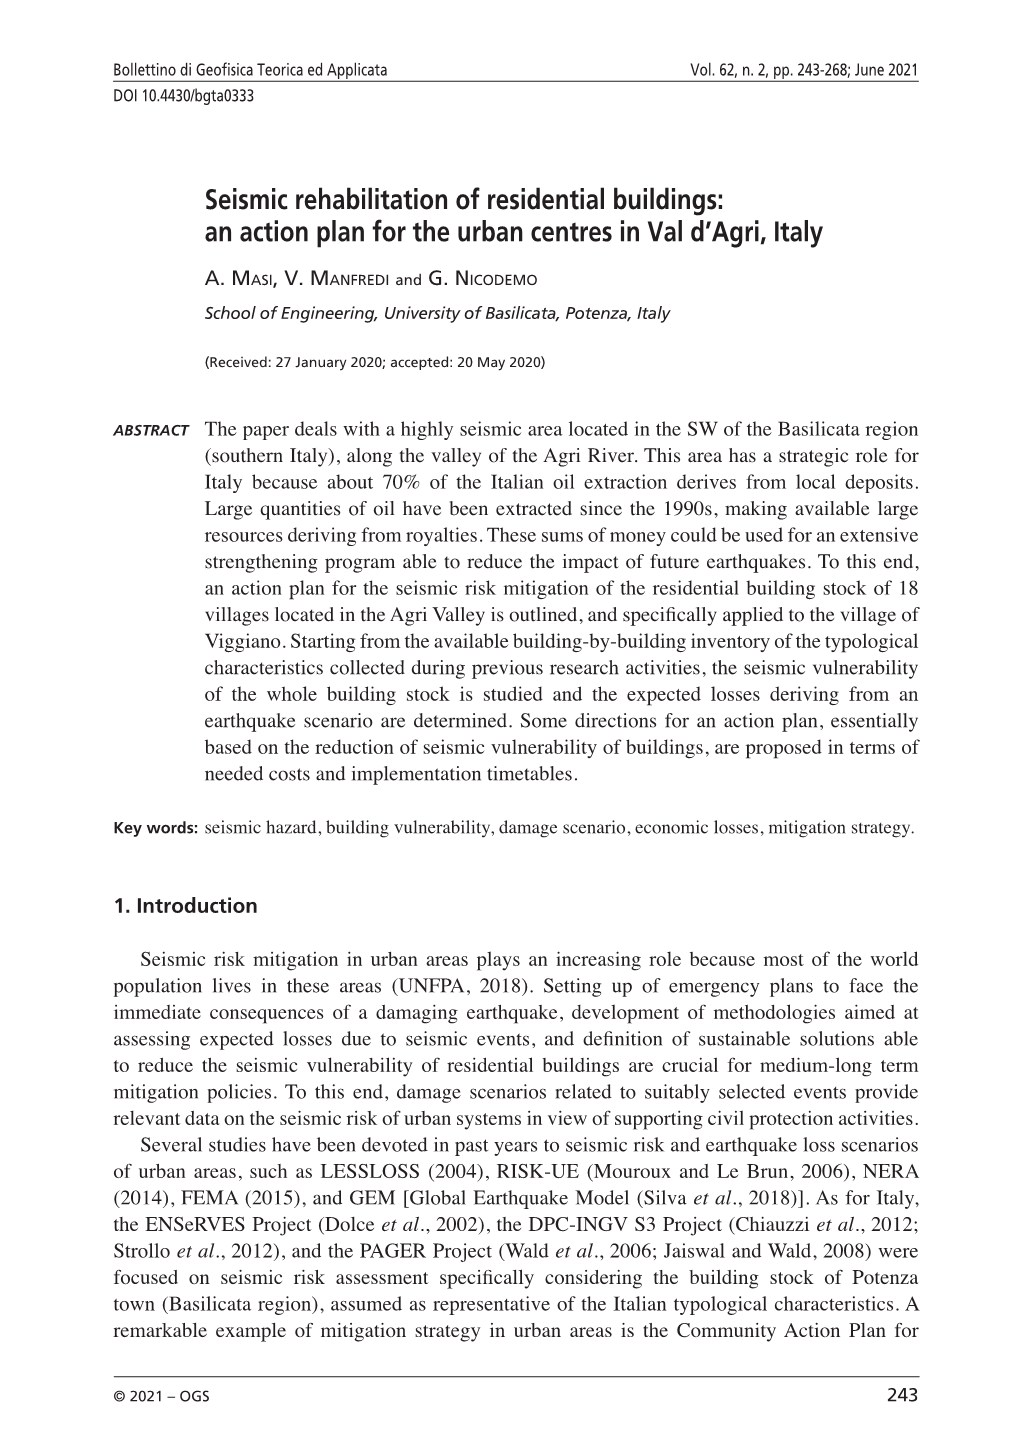 Seismic Rehabilitation of Residential Buildings: an Action Plan for the Urban Centres in Val D'agri, Italy